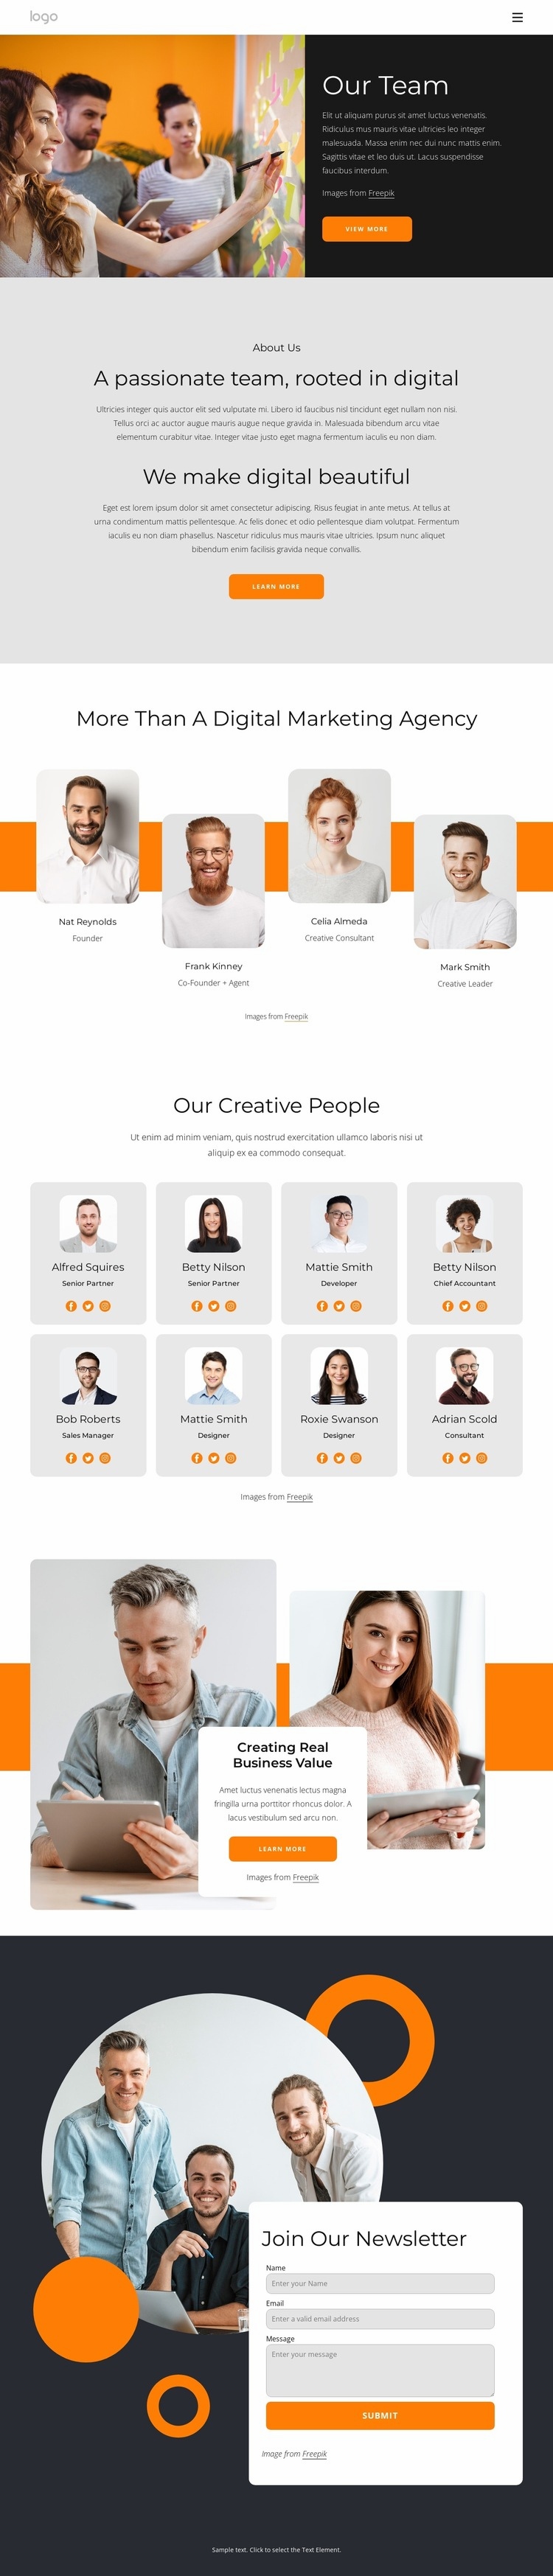 We are creative people with big dreams Html Code Example